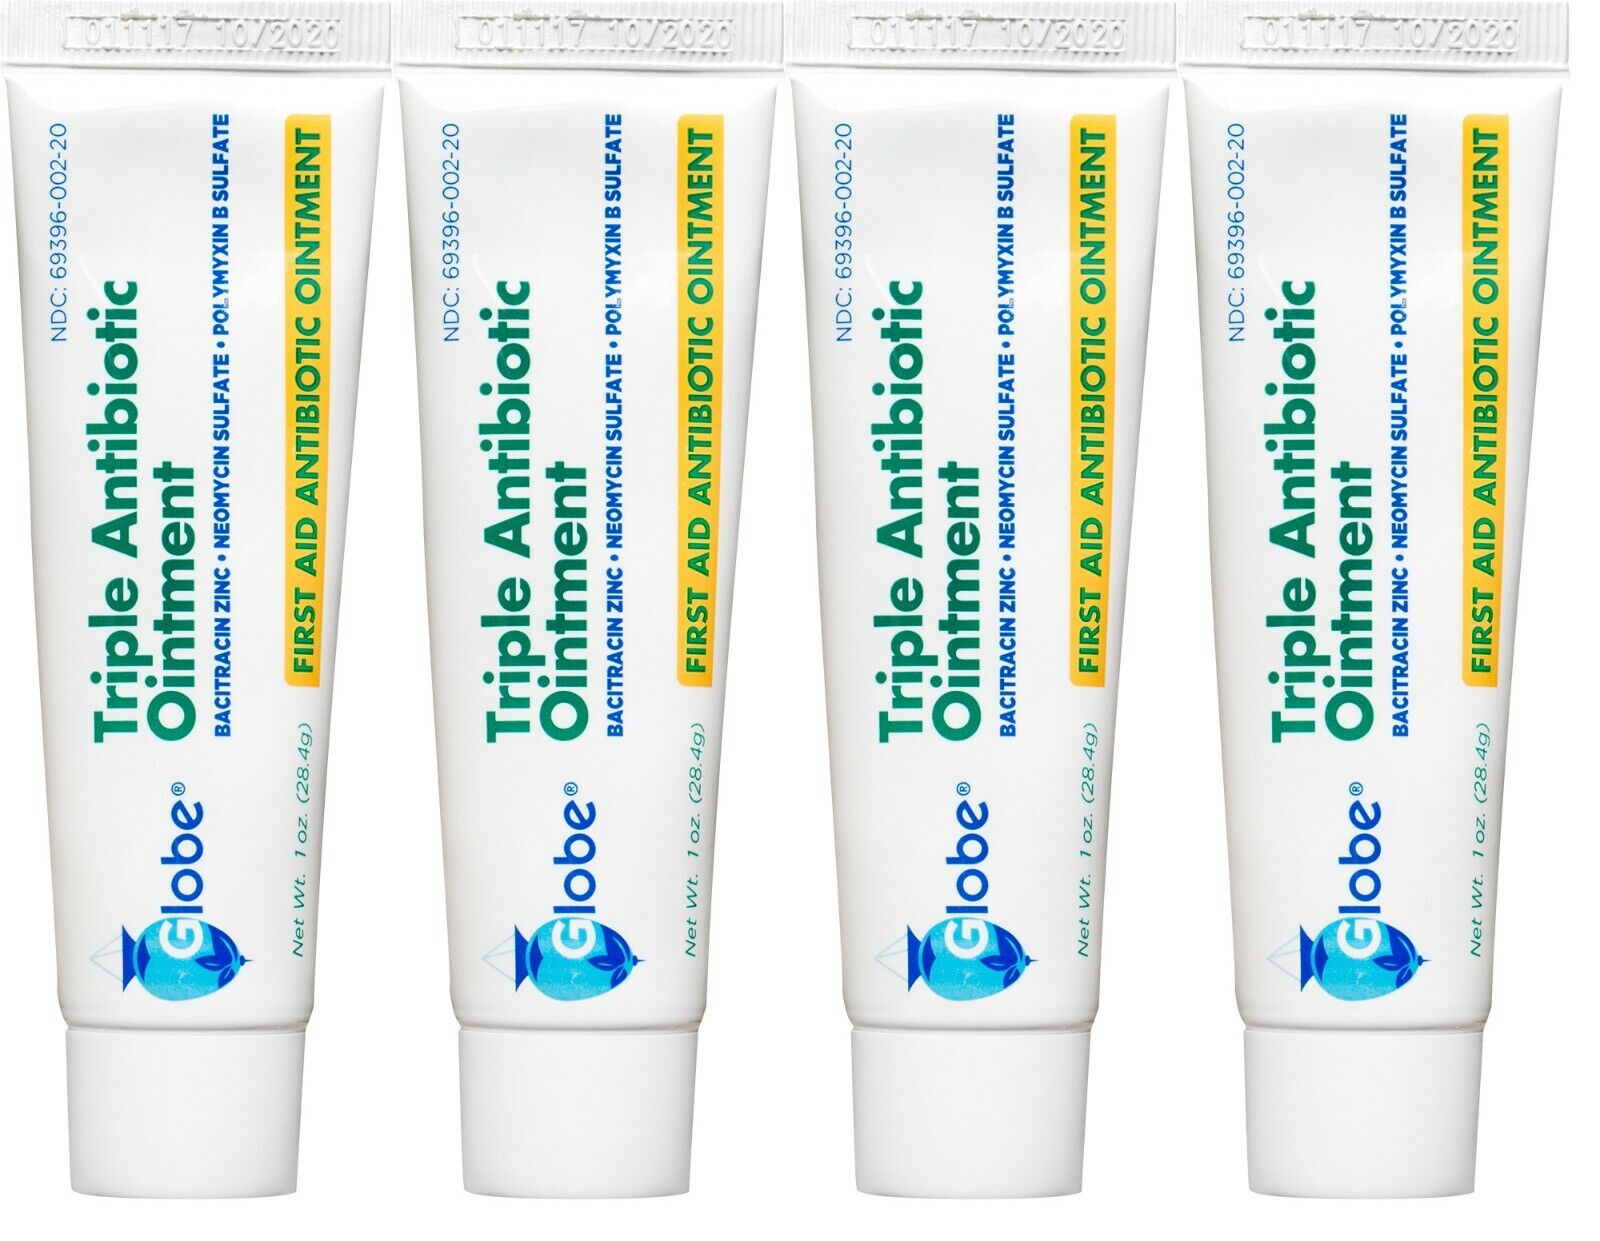 Globe Triple Antibiotic First Aid Ointment, 1 oz, Compare to Neosporin  *4 PACK*